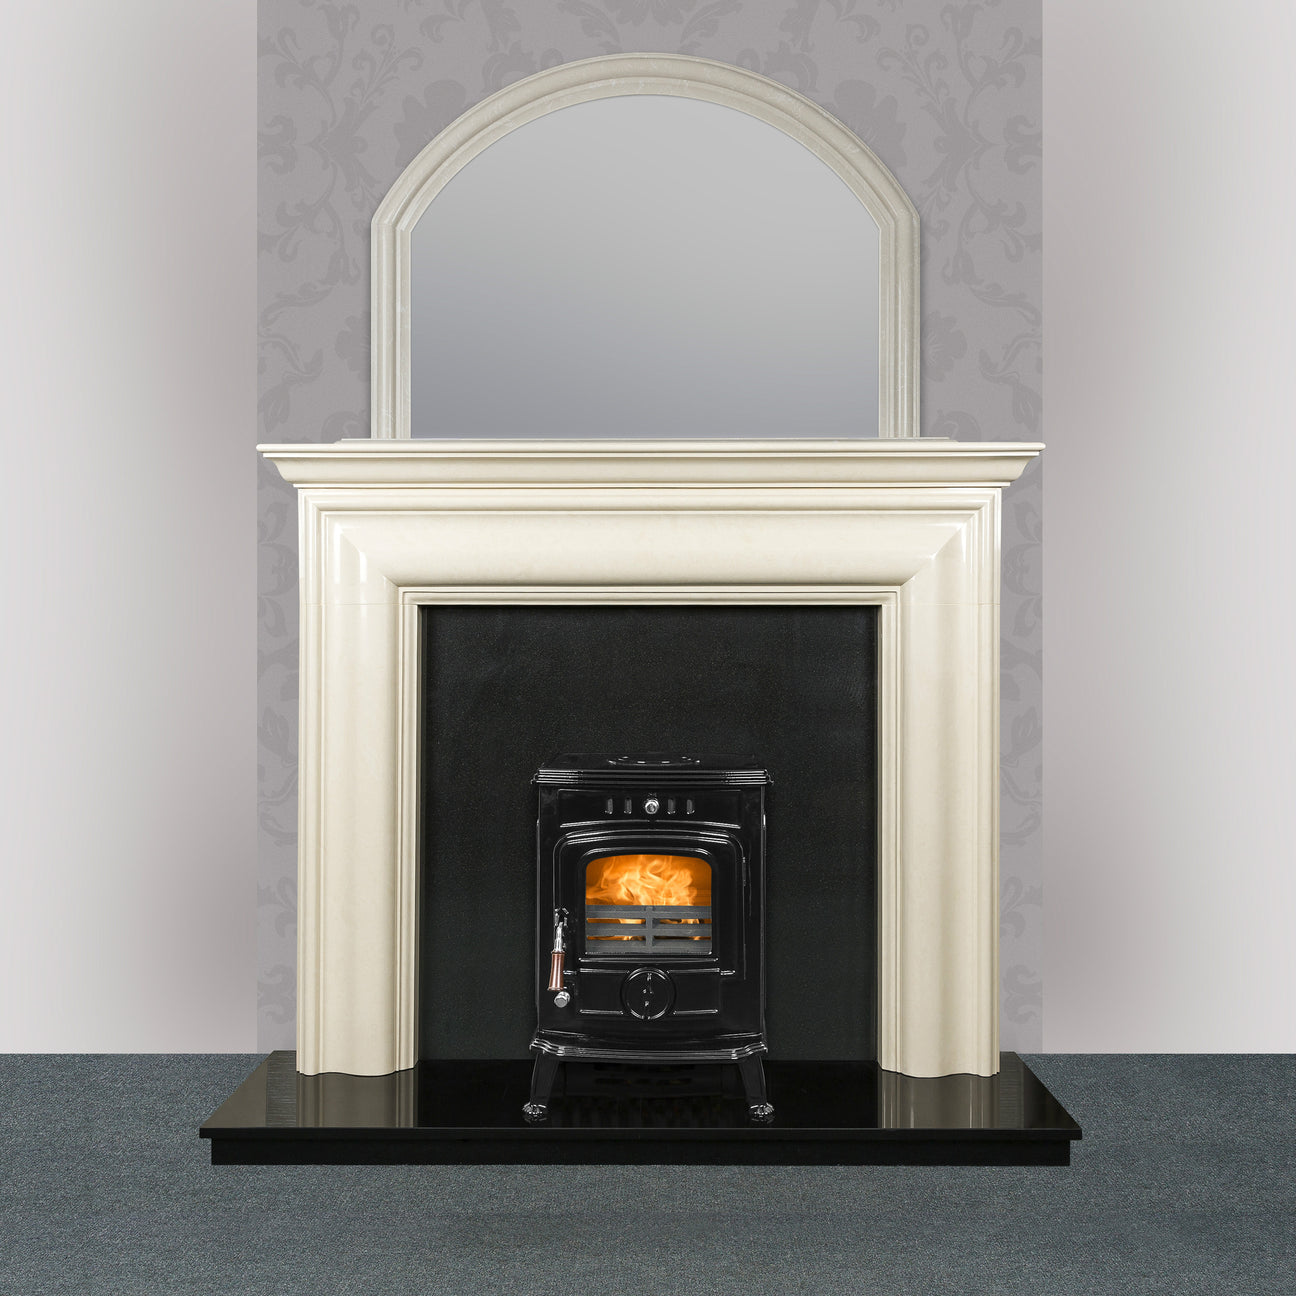 Image of Blake Fireplace in ivory pearl with The Robin Solid Fuel stove